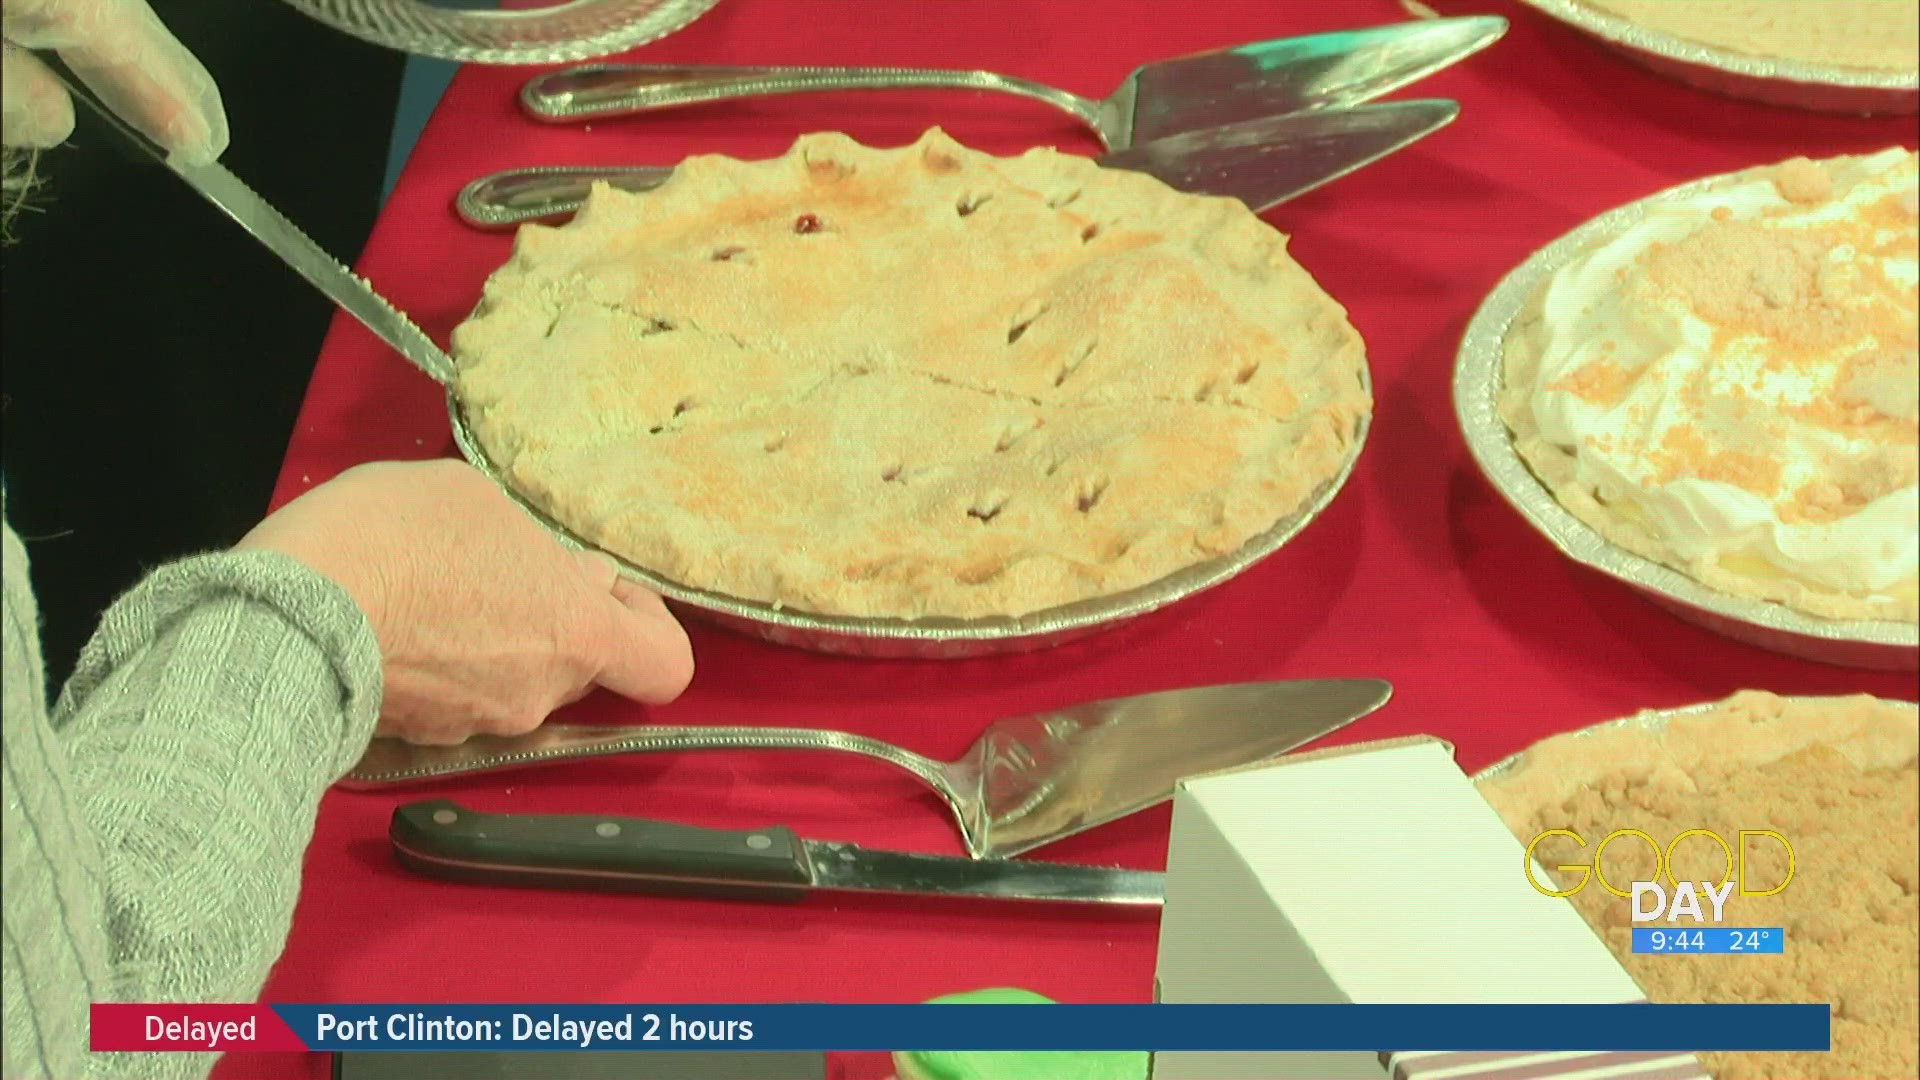 Jeanette Smith of Sauder Village's Doughbox Bakery brings in some tasty pies to celebrate 3.14, or 'pi day'.